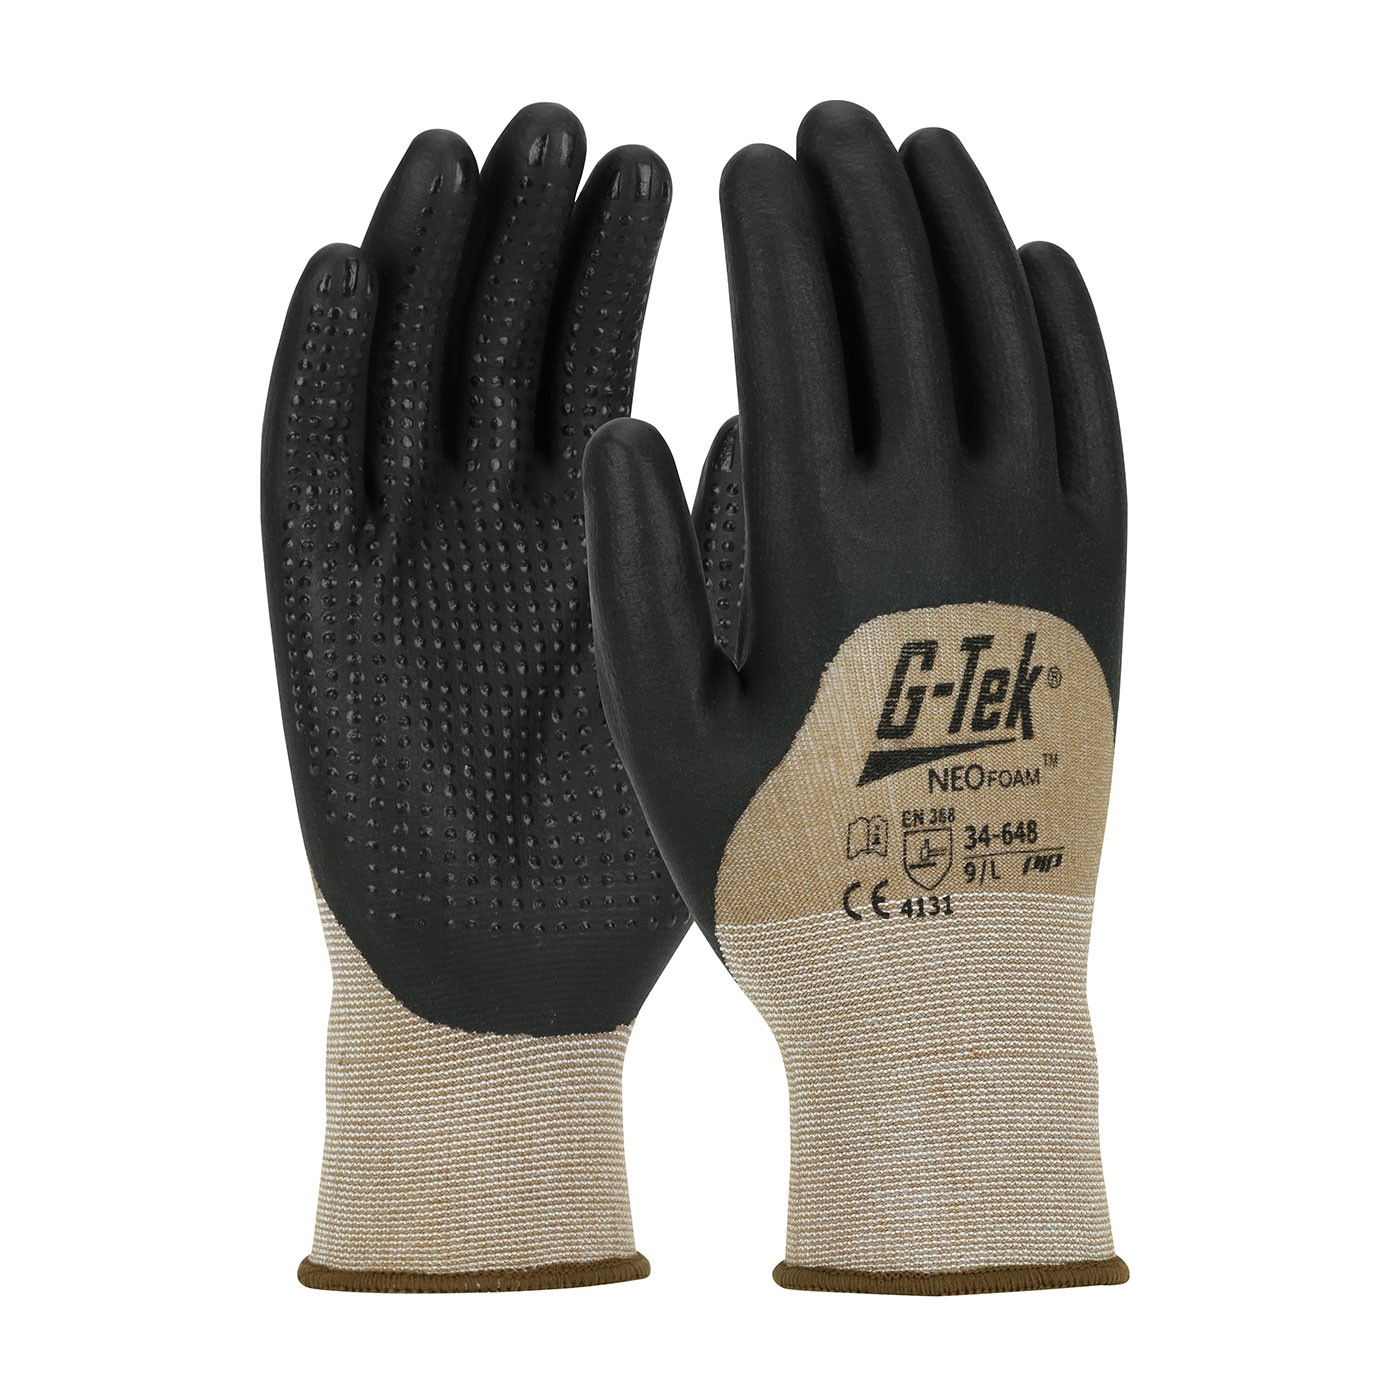 G-Tek® NeoFoam® Seamless Nylon Glove with NeoFoam® Coated Palm, Fingers & Knuckles and Micro Dot Palm - Touchscreen Compatible (#34-648)